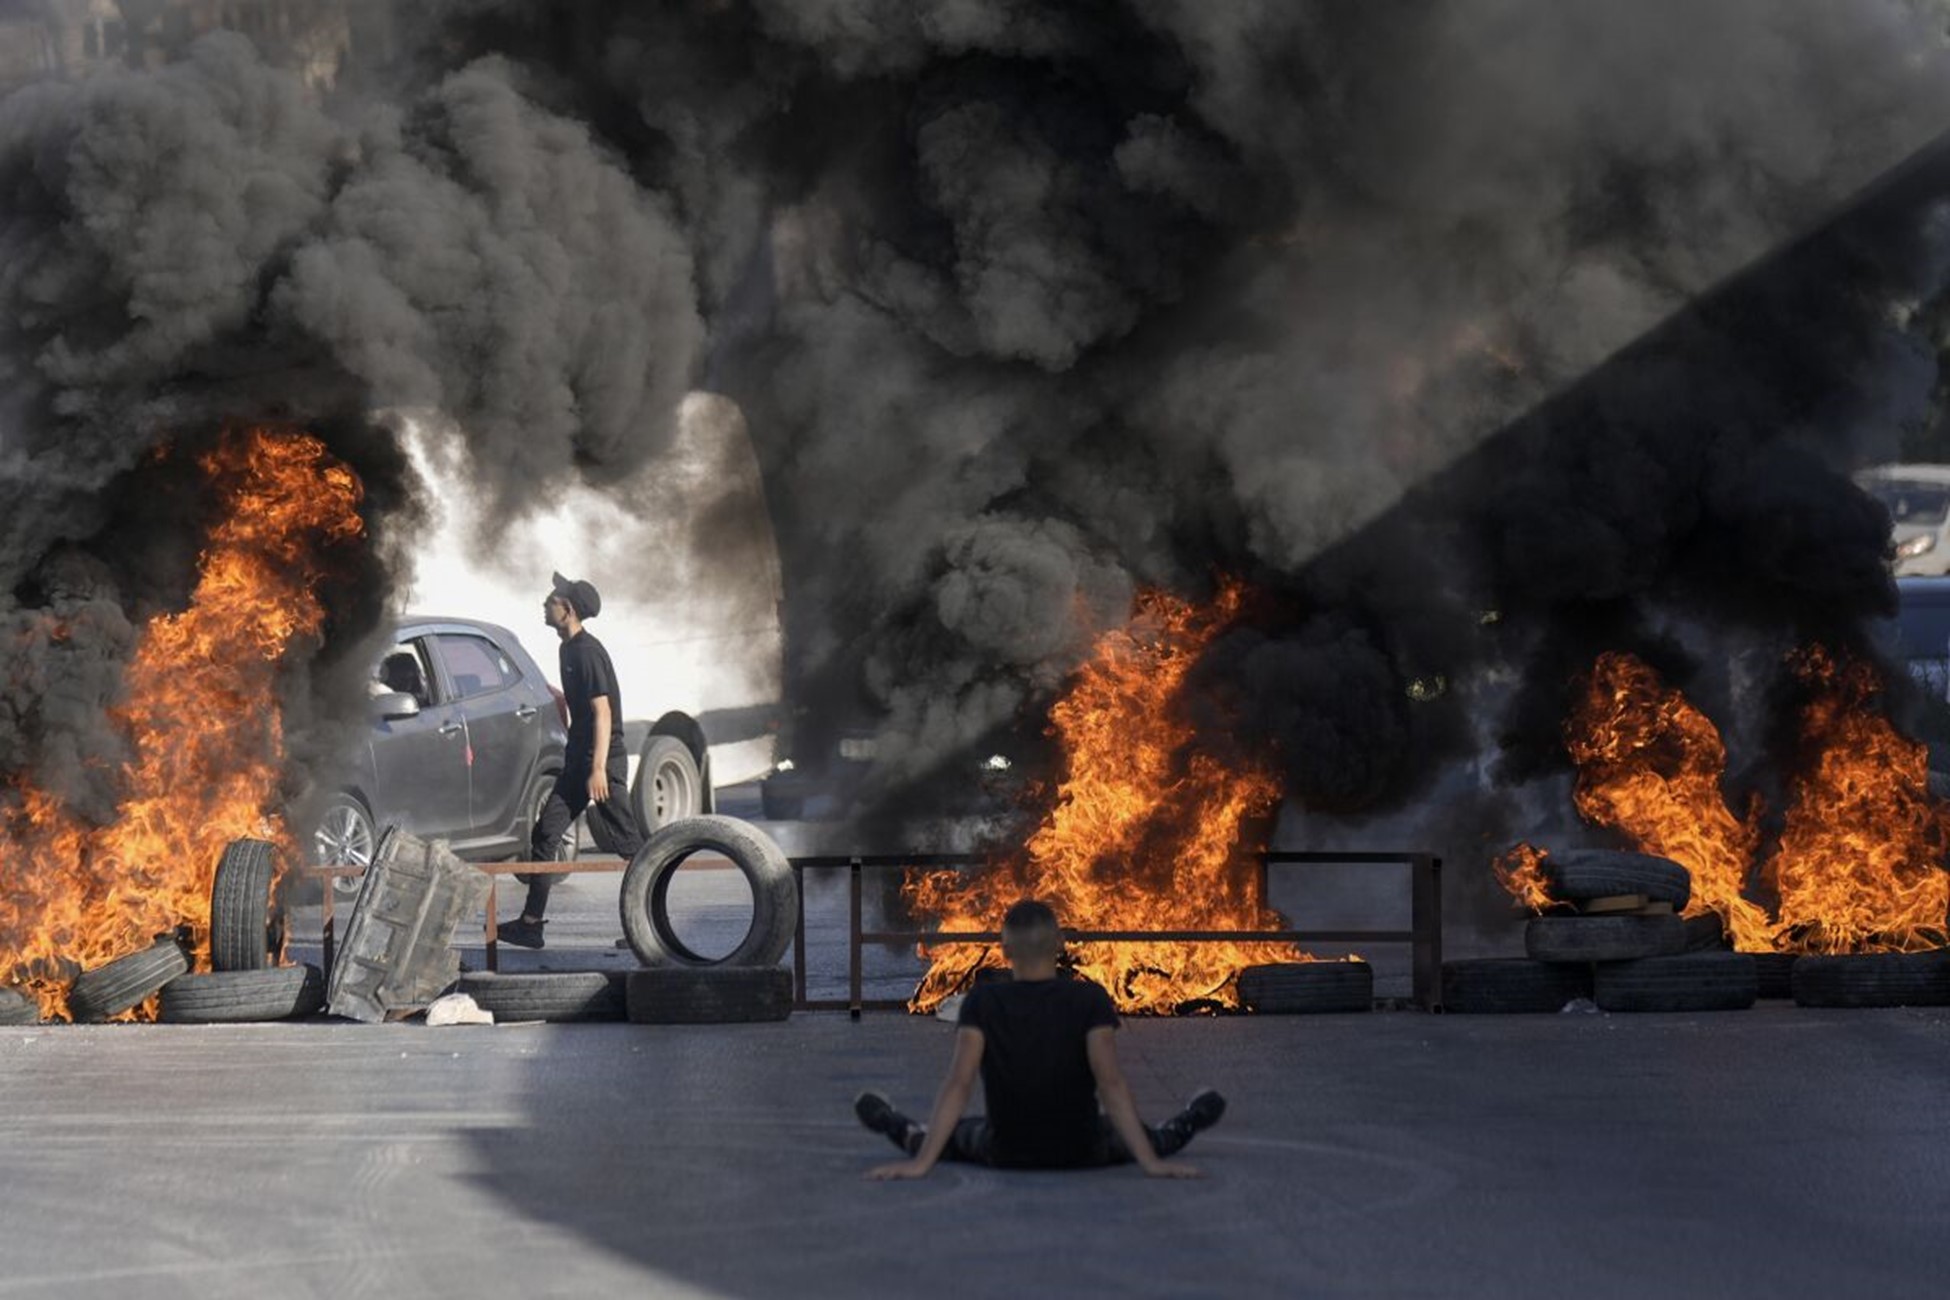 Palestinian protesters sit in front of burning barricades made of tires